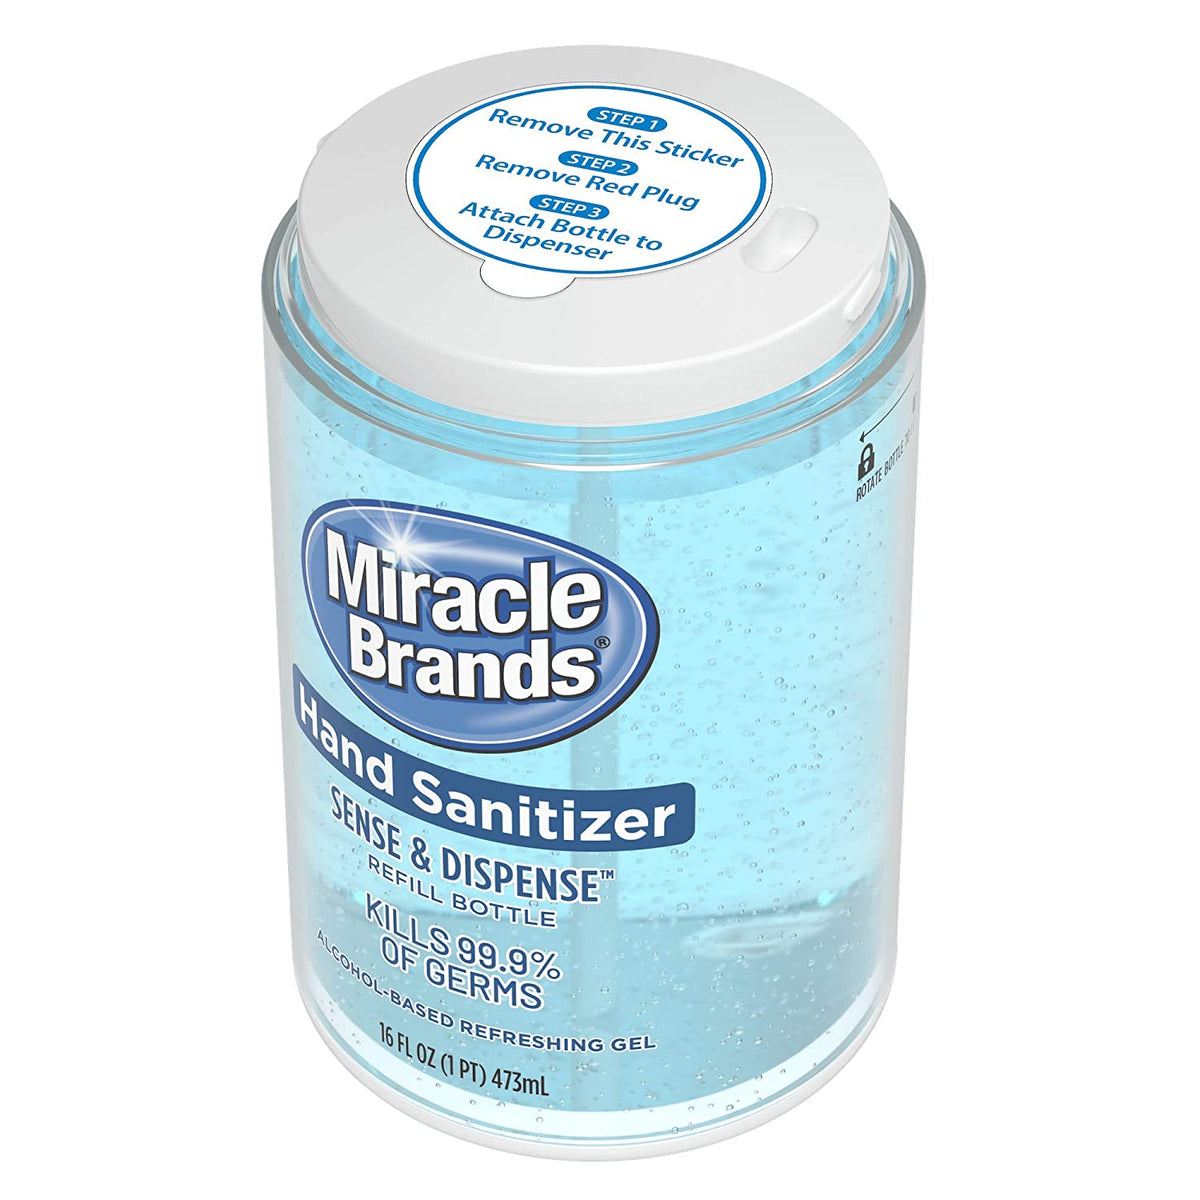 Miracle Brands 16-oz Hand Sanitizer Bottle Gel in the Hand